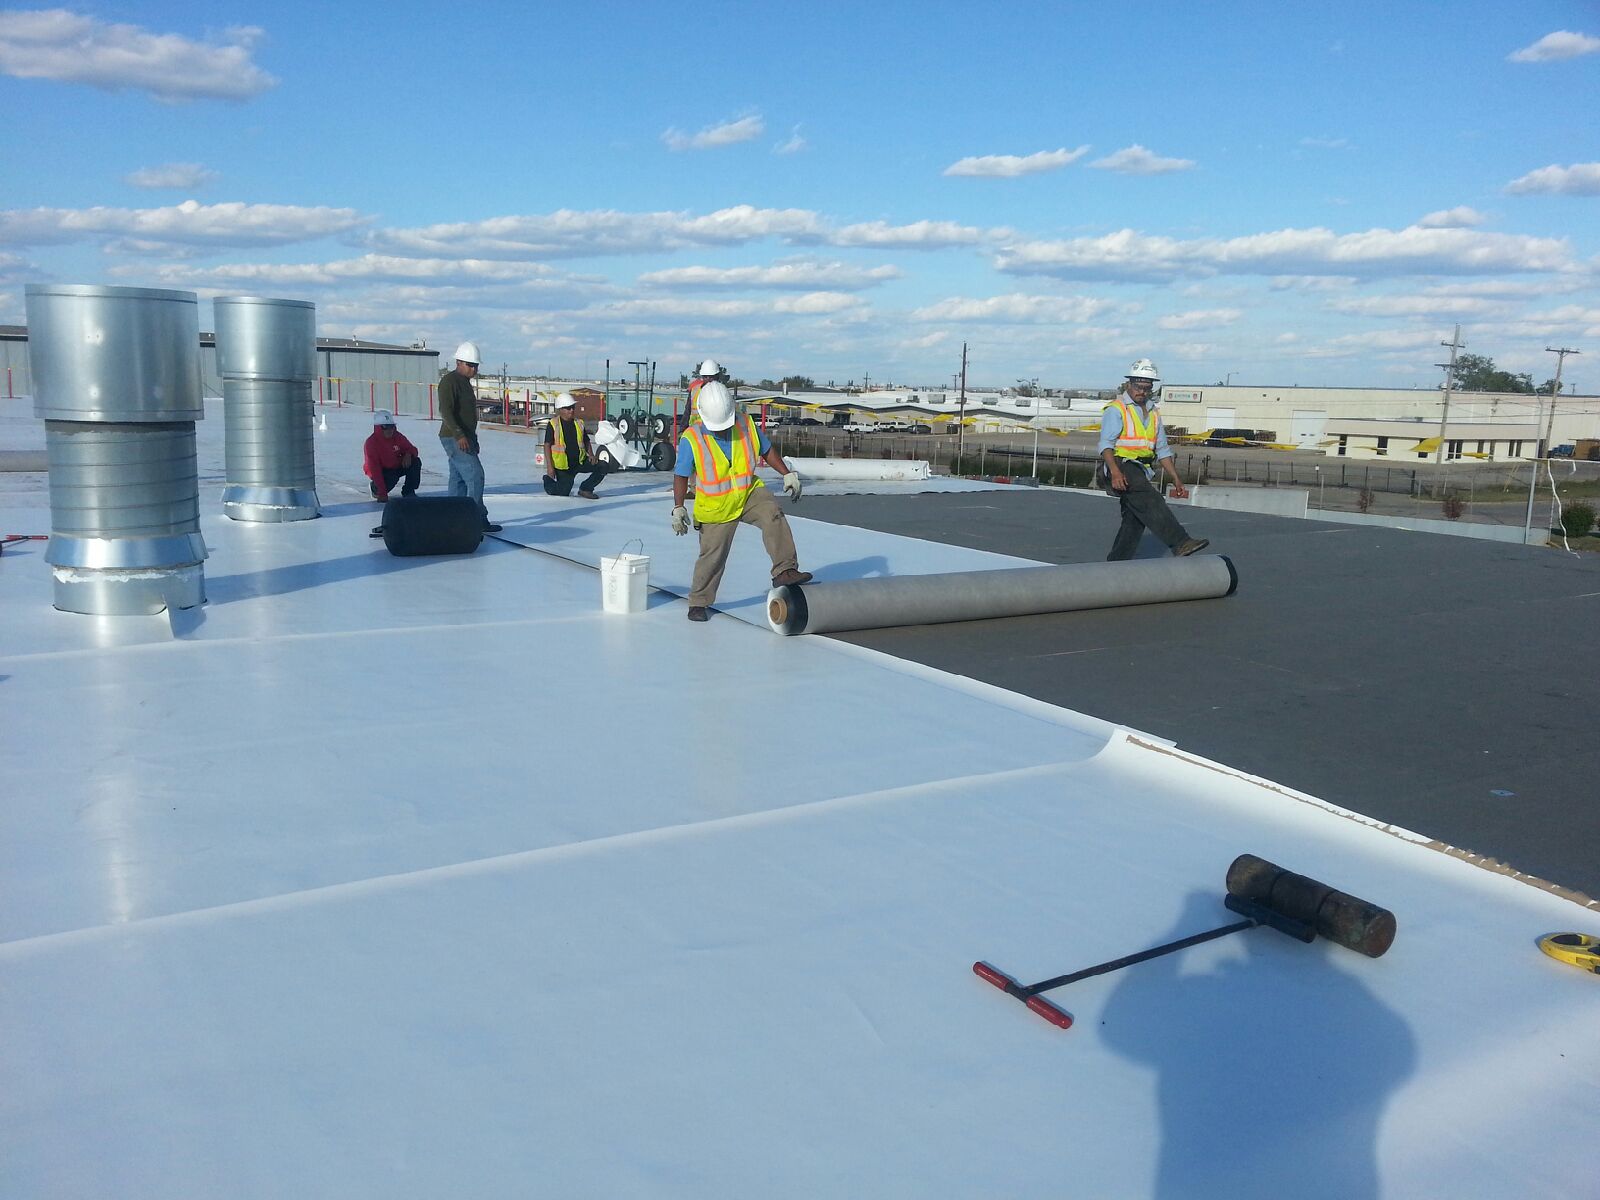 TPO Flat Roofing